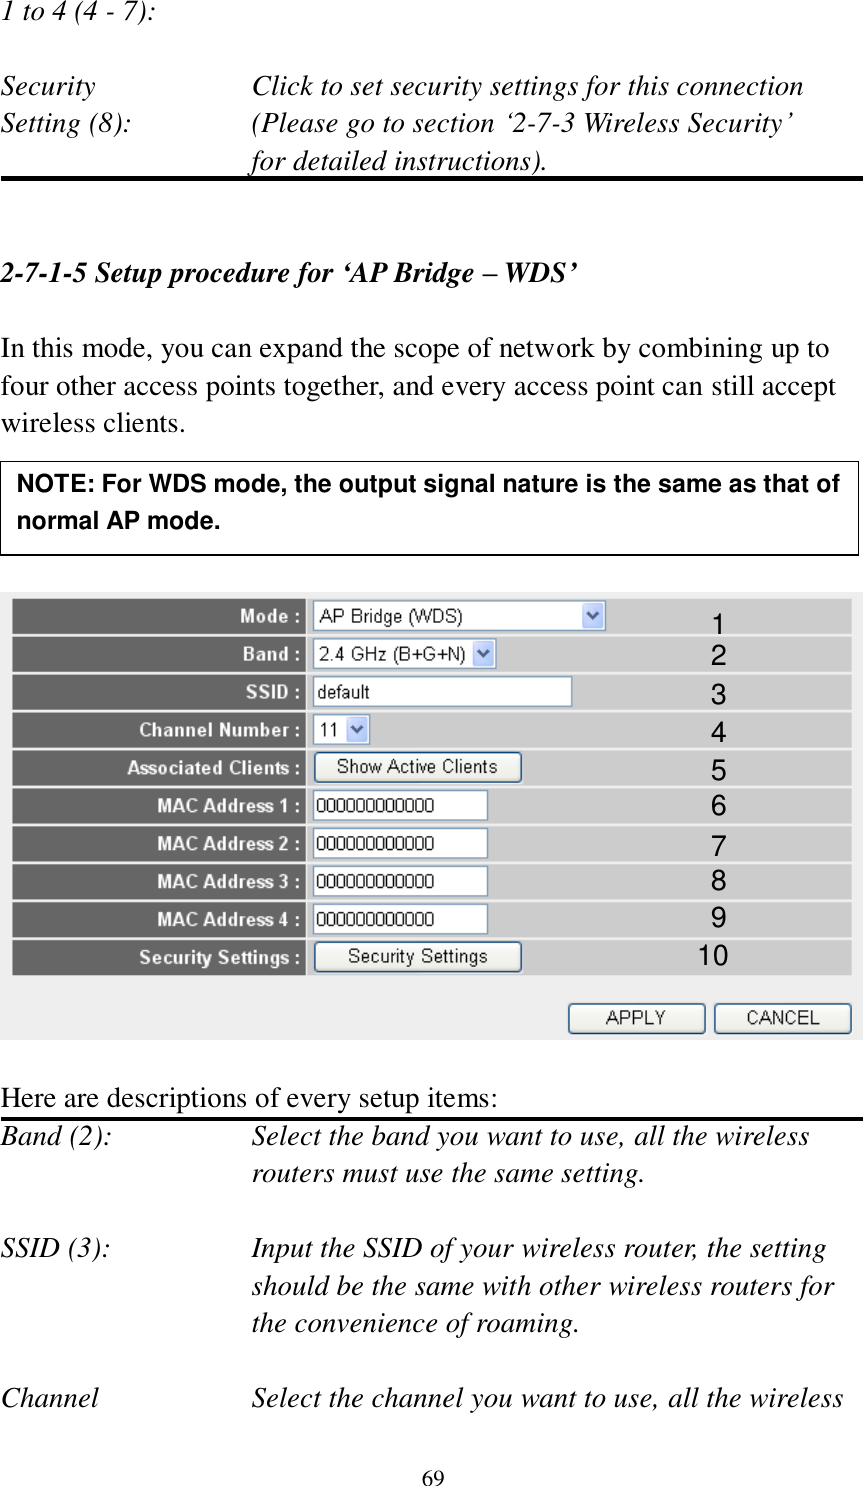 69 1 to 4 (4 - 7):    Security    Click to set security settings for this connection Setting (8):  (Please go to section „2-7-3 Wireless Security‟   for detailed instructions).   2-7-1-5 Setup procedure for ‘AP Bridge – WDS’  In this mode, you can expand the scope of network by combining up to four other access points together, and every access point can still accept wireless clients.       Here are descriptions of every setup items: Band (2):  Select the band you want to use, all the wireless routers must use the same setting.  SSID (3):  Input the SSID of your wireless router, the setting should be the same with other wireless routers for the convenience of roaming.  Channel  Select the channel you want to use, all the wireless 1 2 3 4 5 7 8 6 9 10 NOTE: For WDS mode, the output signal nature is the same as that of normal AP mode.   